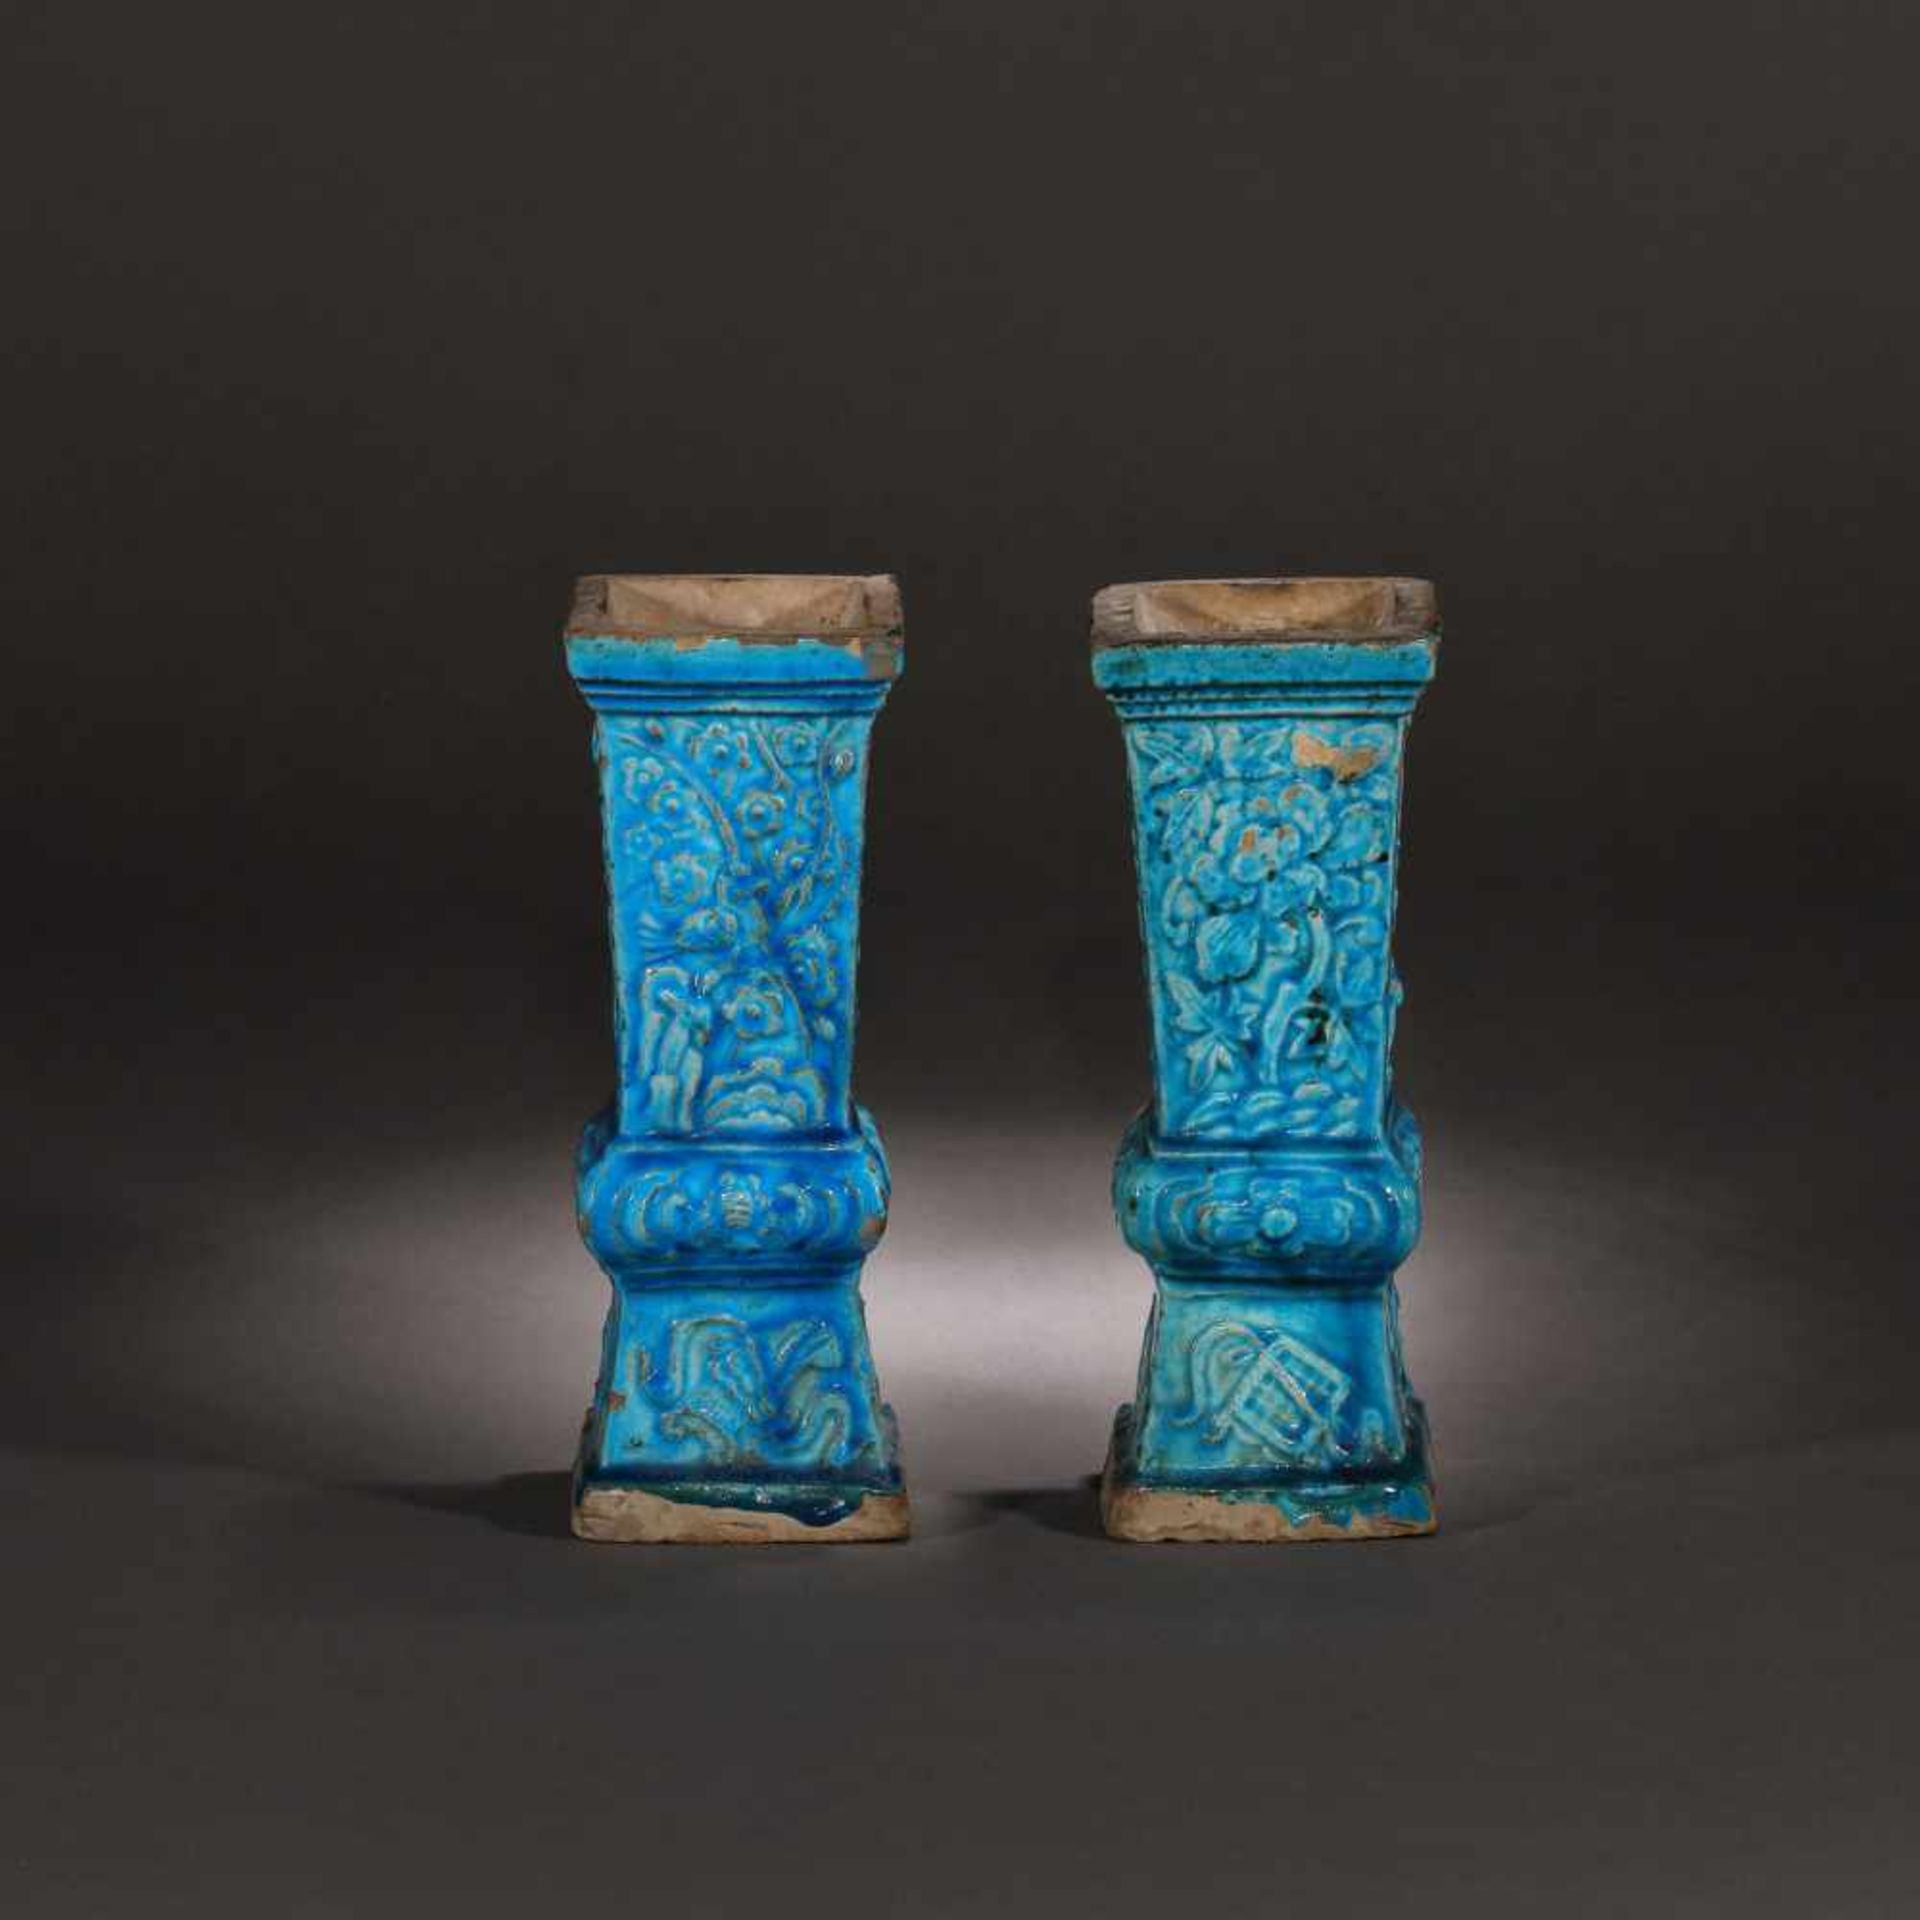 Two Fahua ceramic vessels, turquoise glaze, decorated with floral motifs, the Ming Dynasty Era,